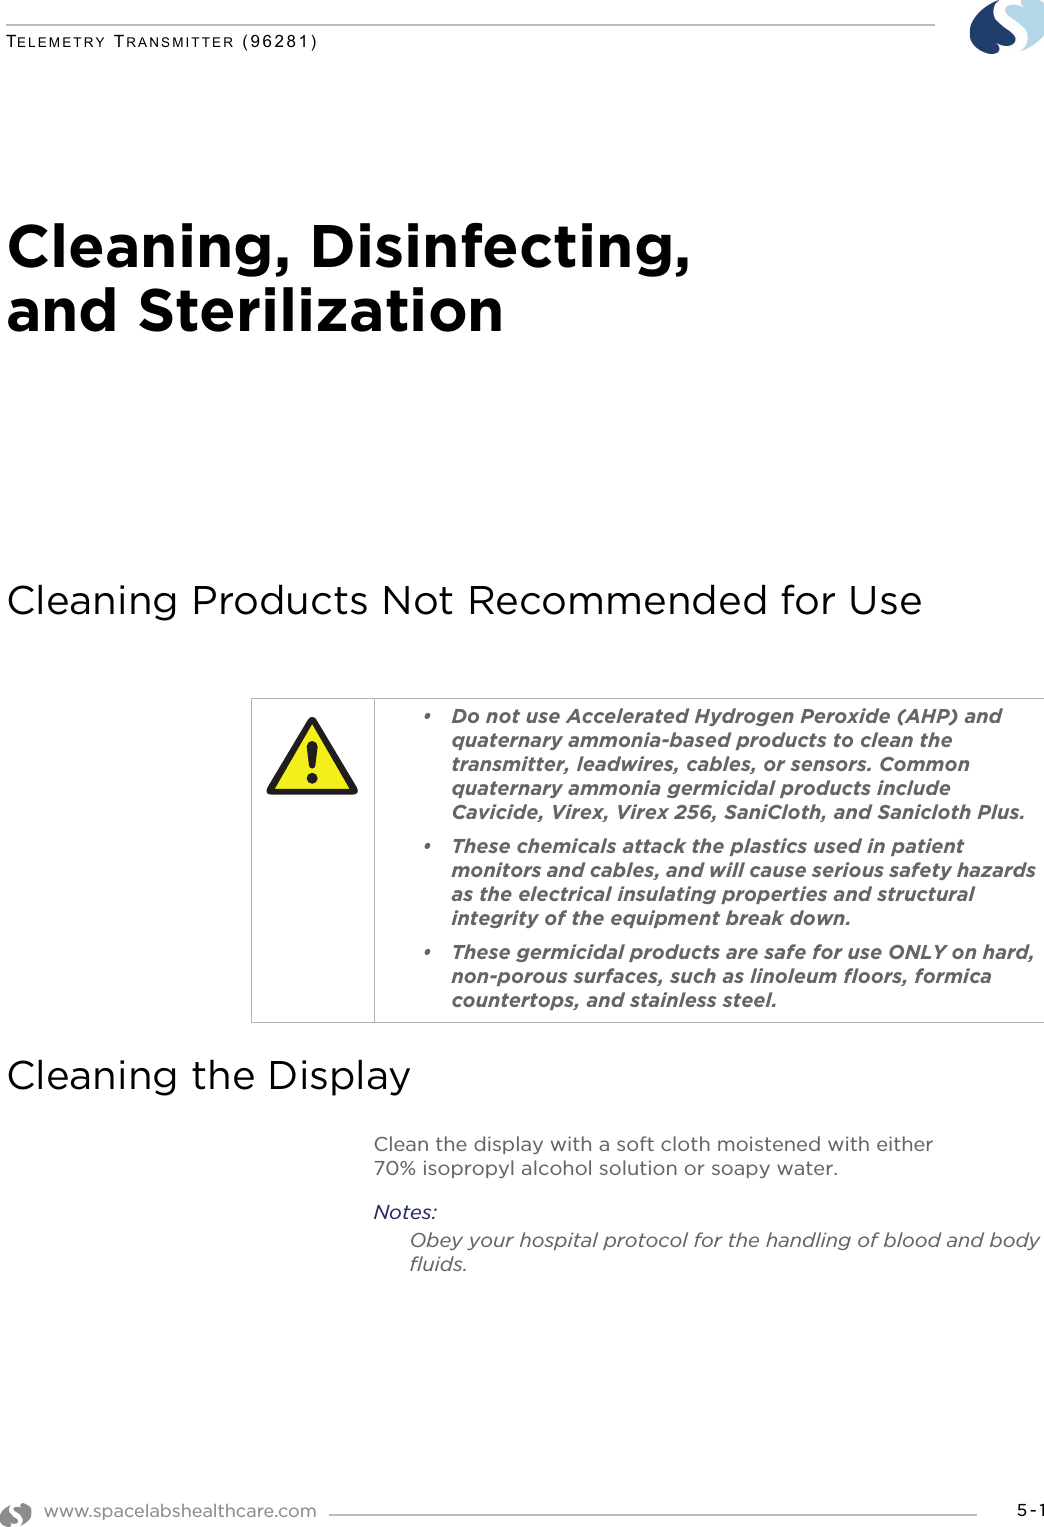 www.spacelabshealthcare.com 5-1TELEMETRY TRANSMITTER (96281)Cleaning, Disinfecting, and SterilizationCleaning Products Not Recommended for UseCleaning the DisplayClean the display with a soft cloth moistened with either 70% isopropyl alcohol solution or soapy water.Notes:Obey your hospital protocol for the handling of blood and body fluids.• Do not use Accelerated Hydrogen Peroxide (AHP) and quaternary ammonia-based products to clean the transmitter, leadwires, cables, or sensors. Common quaternary ammonia germicidal products include Cavicide, Virex, Virex 256, SaniCloth, and Sanicloth Plus. • These chemicals attack the plastics used in patient monitors and cables, and will cause serious safety hazards as the electrical insulating properties and structural integrity of the equipment break down. • These germicidal products are safe for use ONLY on hard, non-porous surfaces, such as linoleum floors, formica countertops, and stainless steel. 